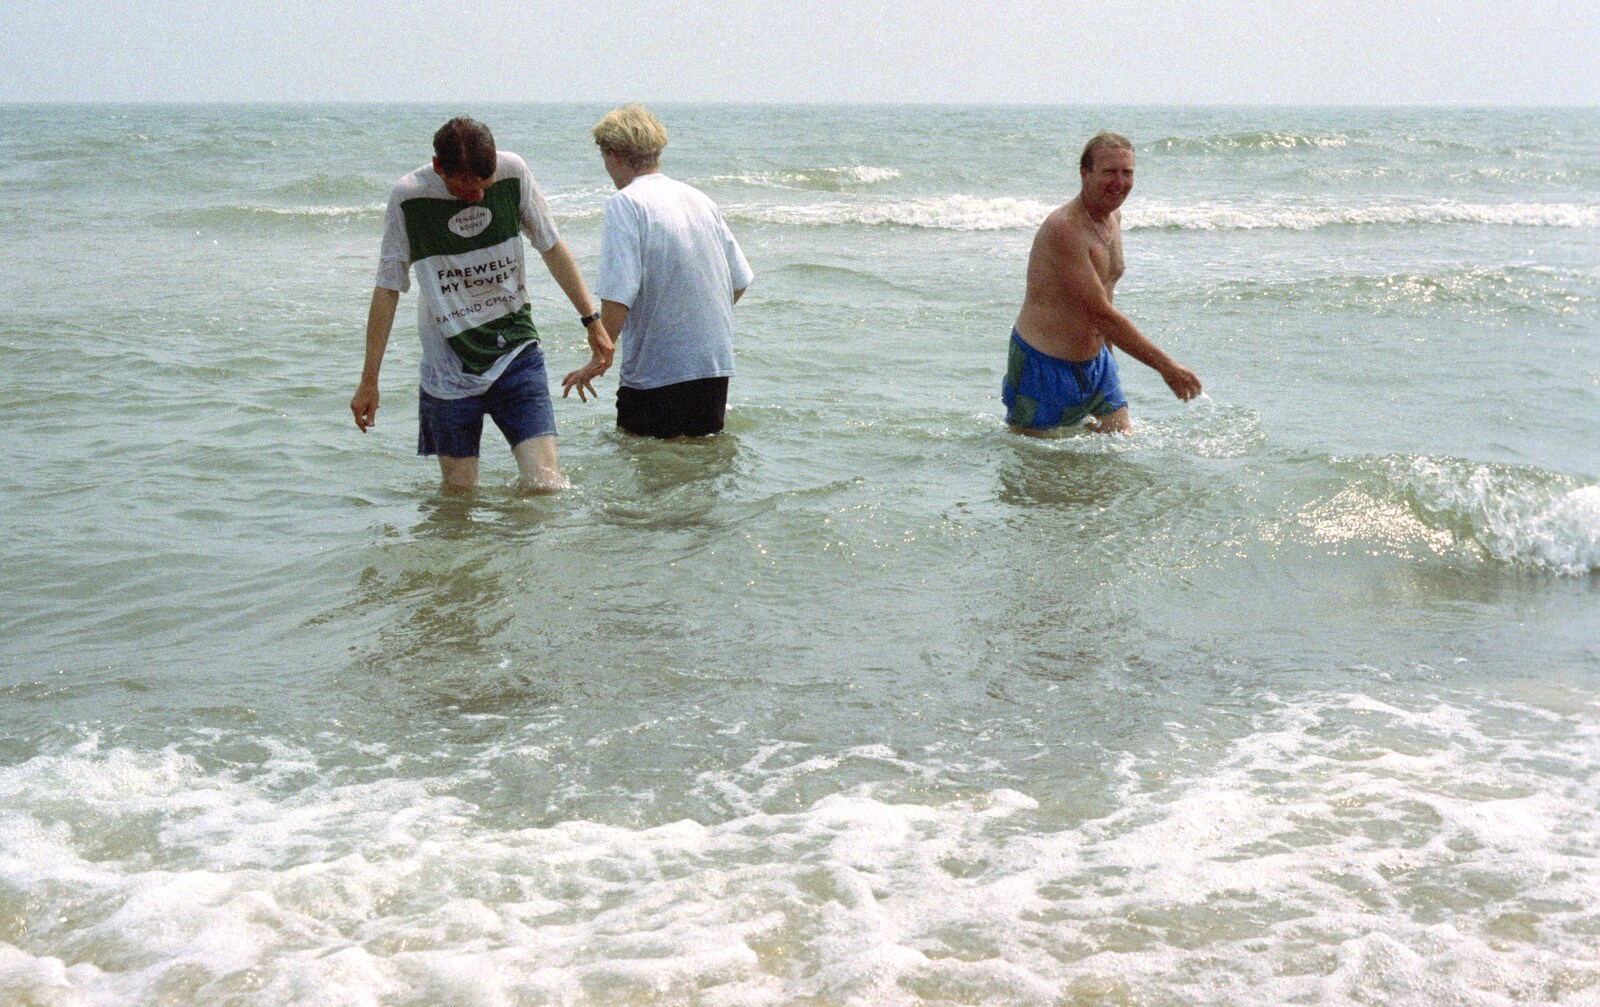 Apple, Paul and John Willy take a dip from BSCC at the Beach, Walberswick, Suffolk - 15th July 1997